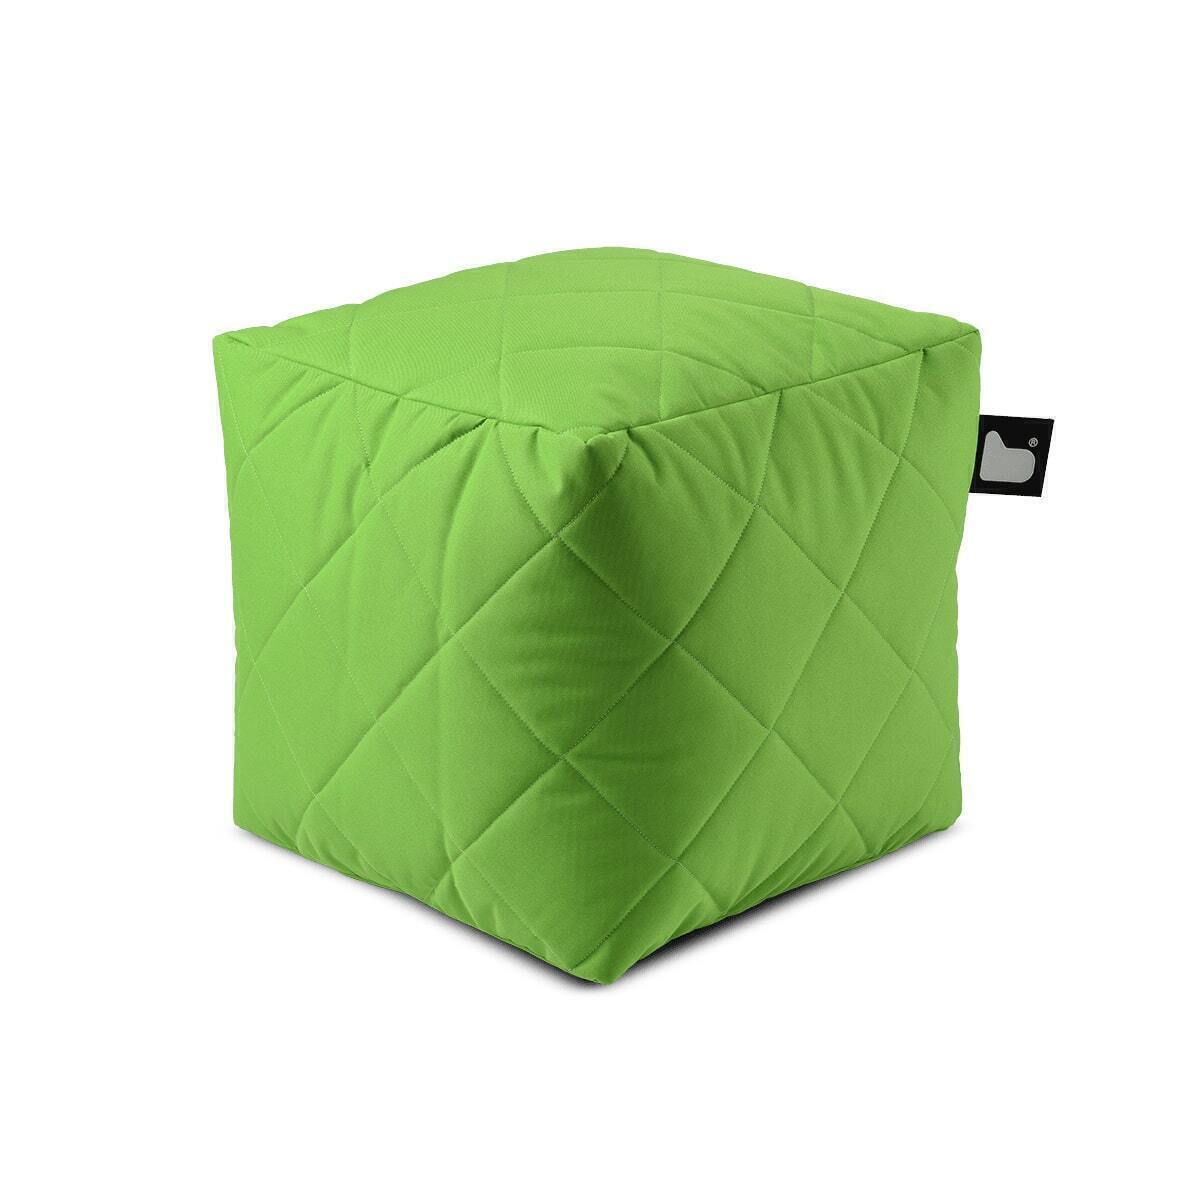 Extreme Lounging - Quilted Bean Box  - Lime product image